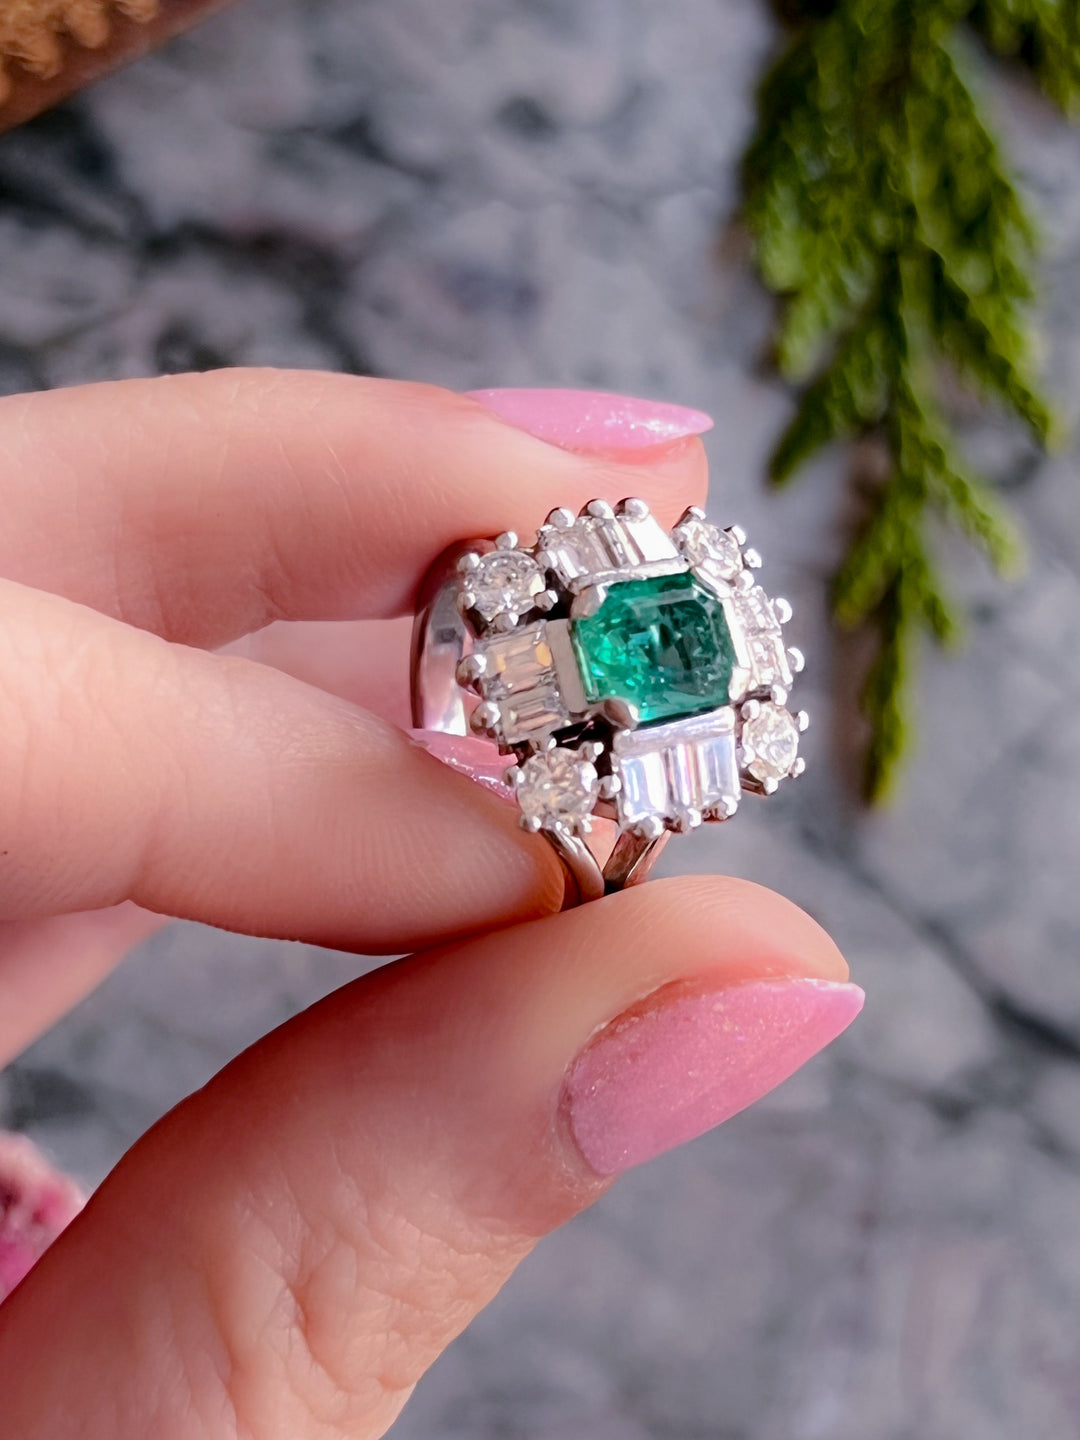 Outstanding Emerald Cocktail Ring Circa 1970